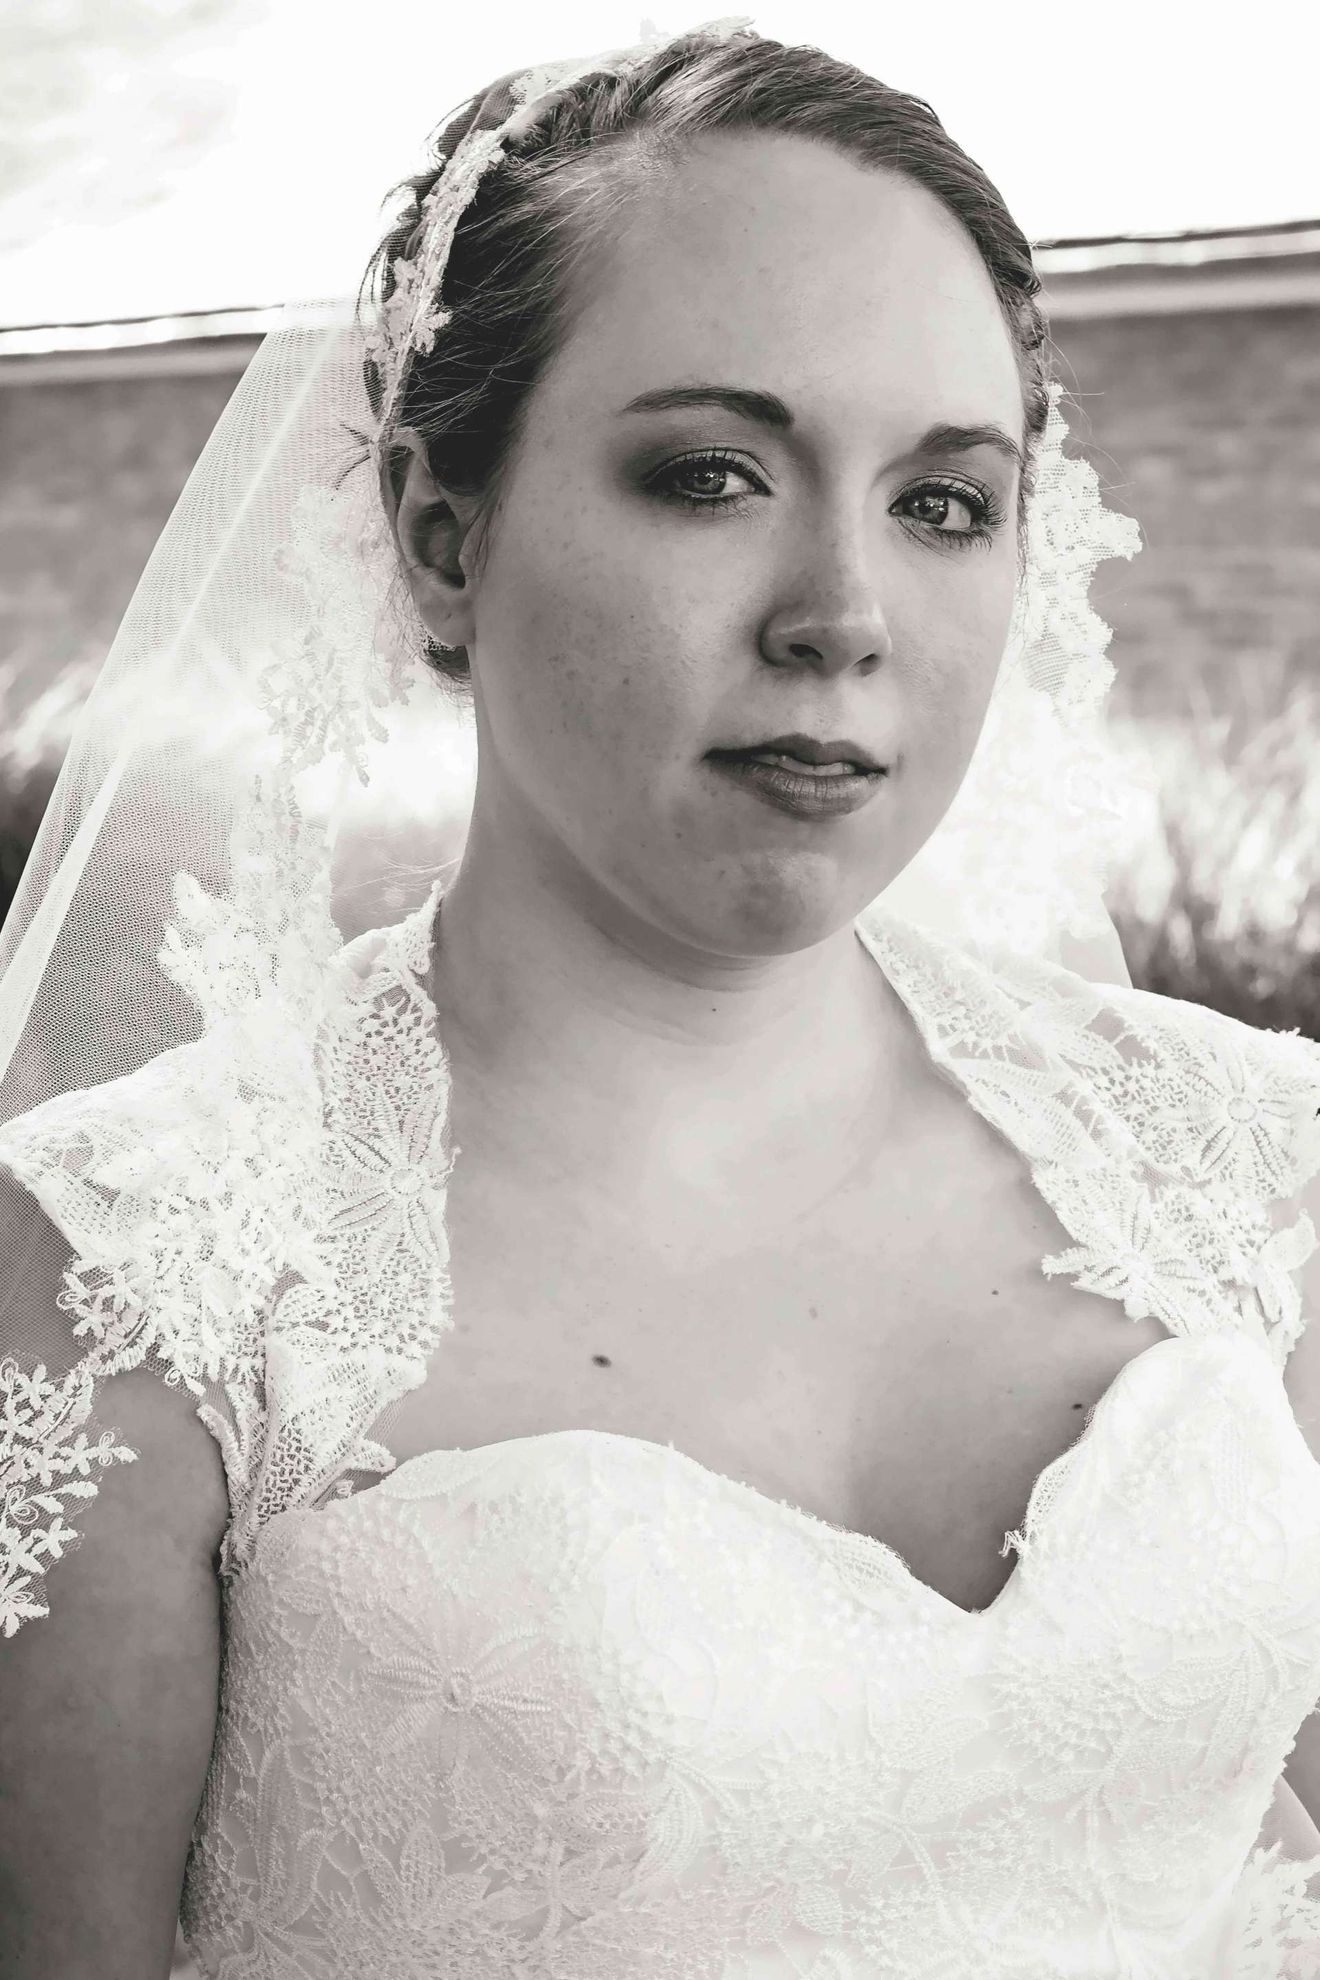 Woman in White Dress Black and White — Weddings in Mansfield, OH